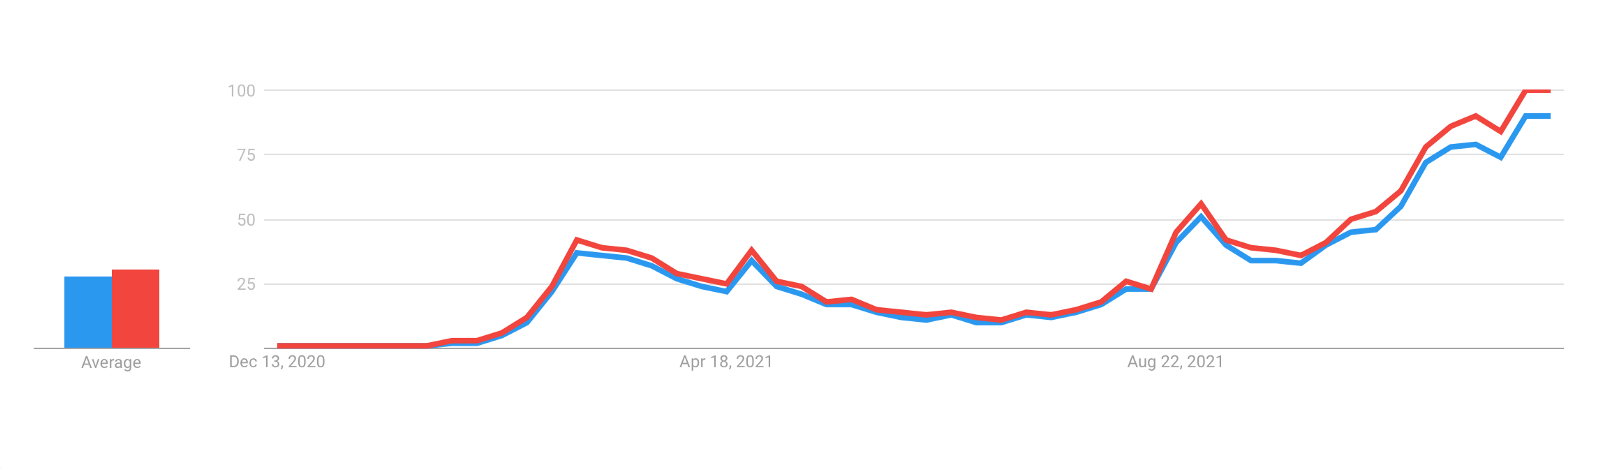 Search results for "NFT" (blue) and "non-fungible token" (red) over 24 months: per Google Trends